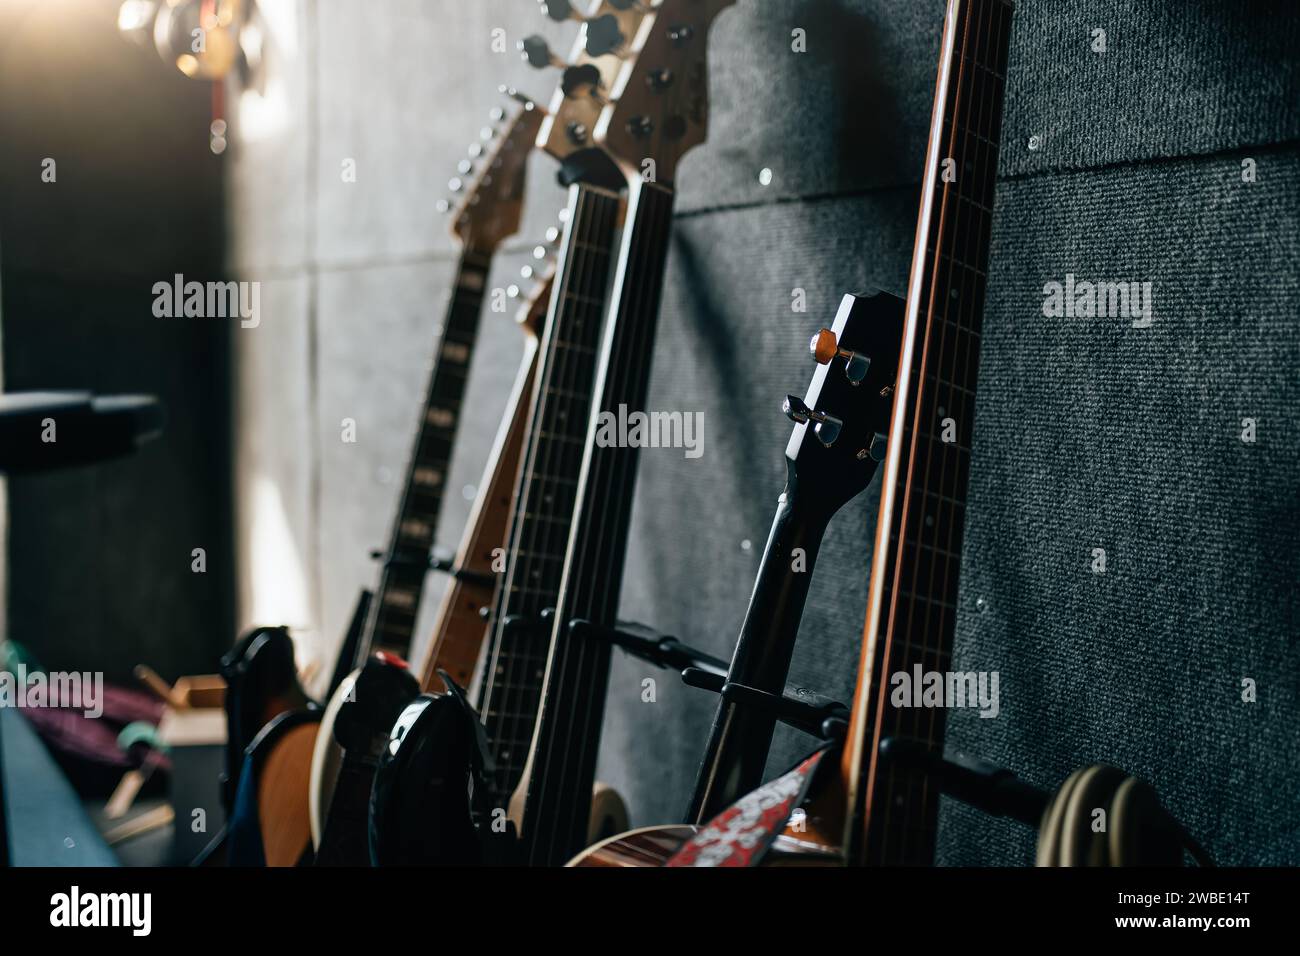 Music instruments in room. Guitars stay in row. Sound recording studio background. Stock Photo